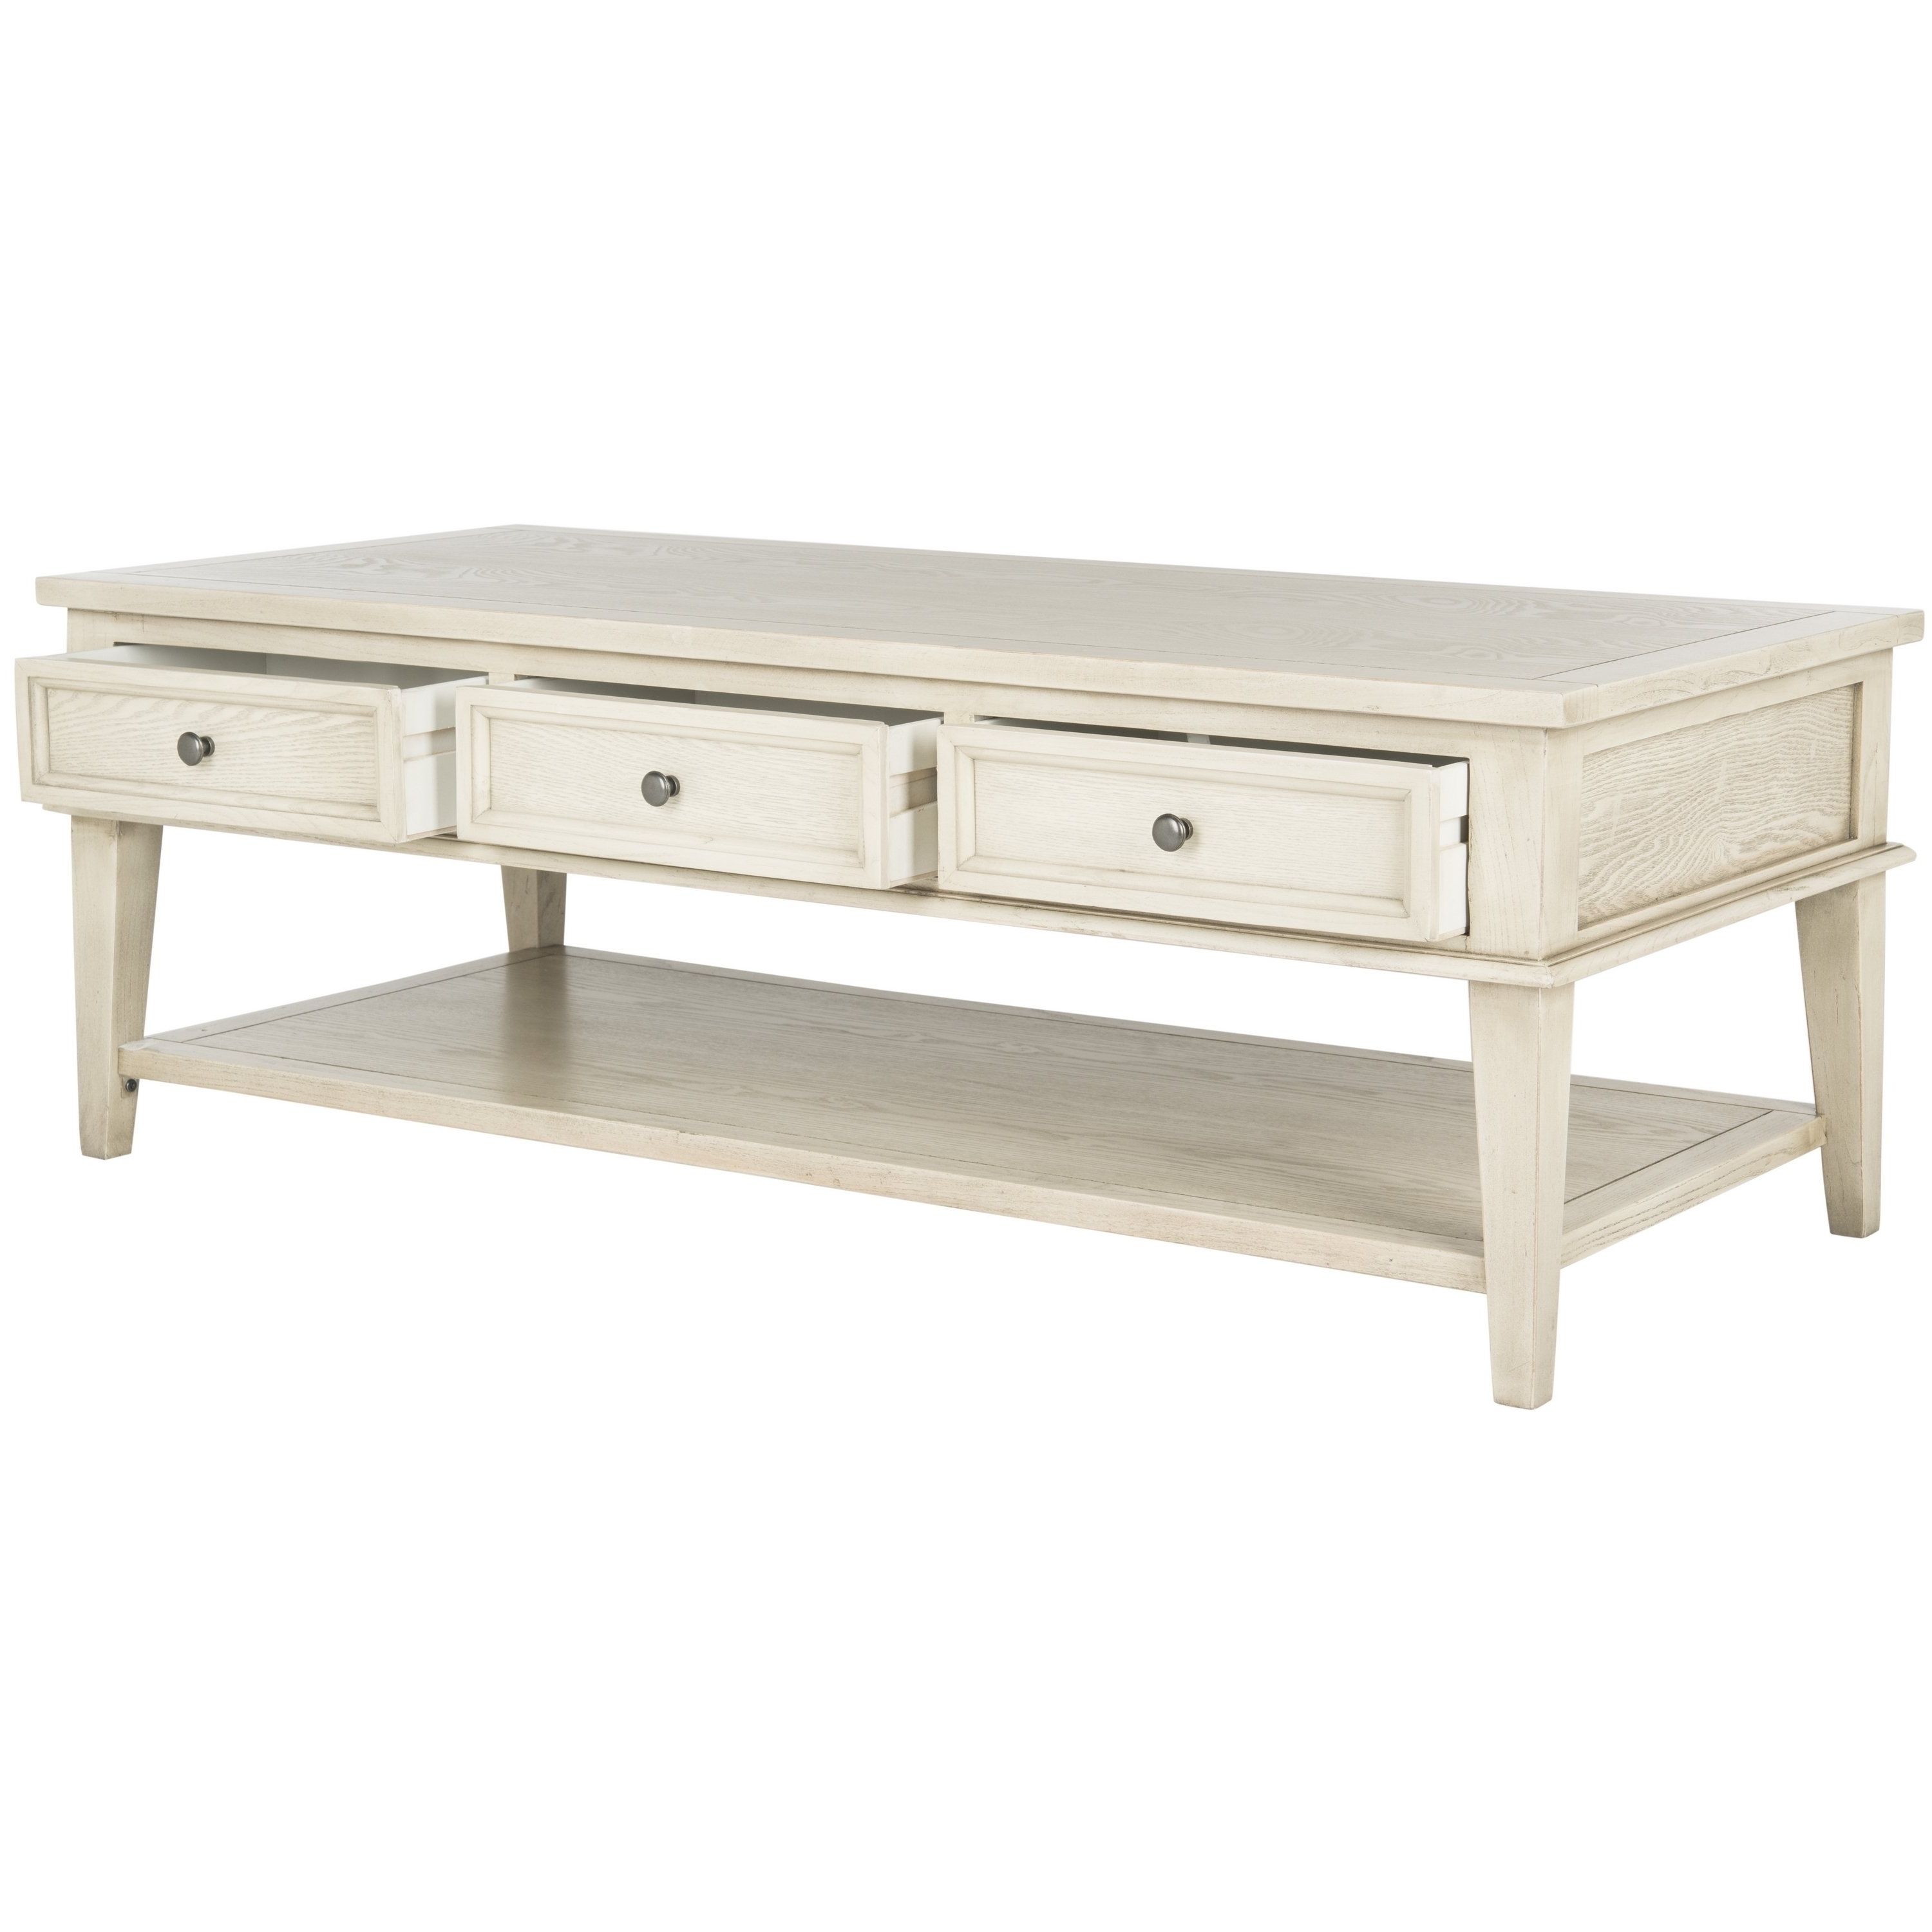 Most Recently Released Candice Ii Storage Cocktail Tables In Shop Safavieh Manelin White Washed Coffee Table – Free Shipping (View 7 of 20)